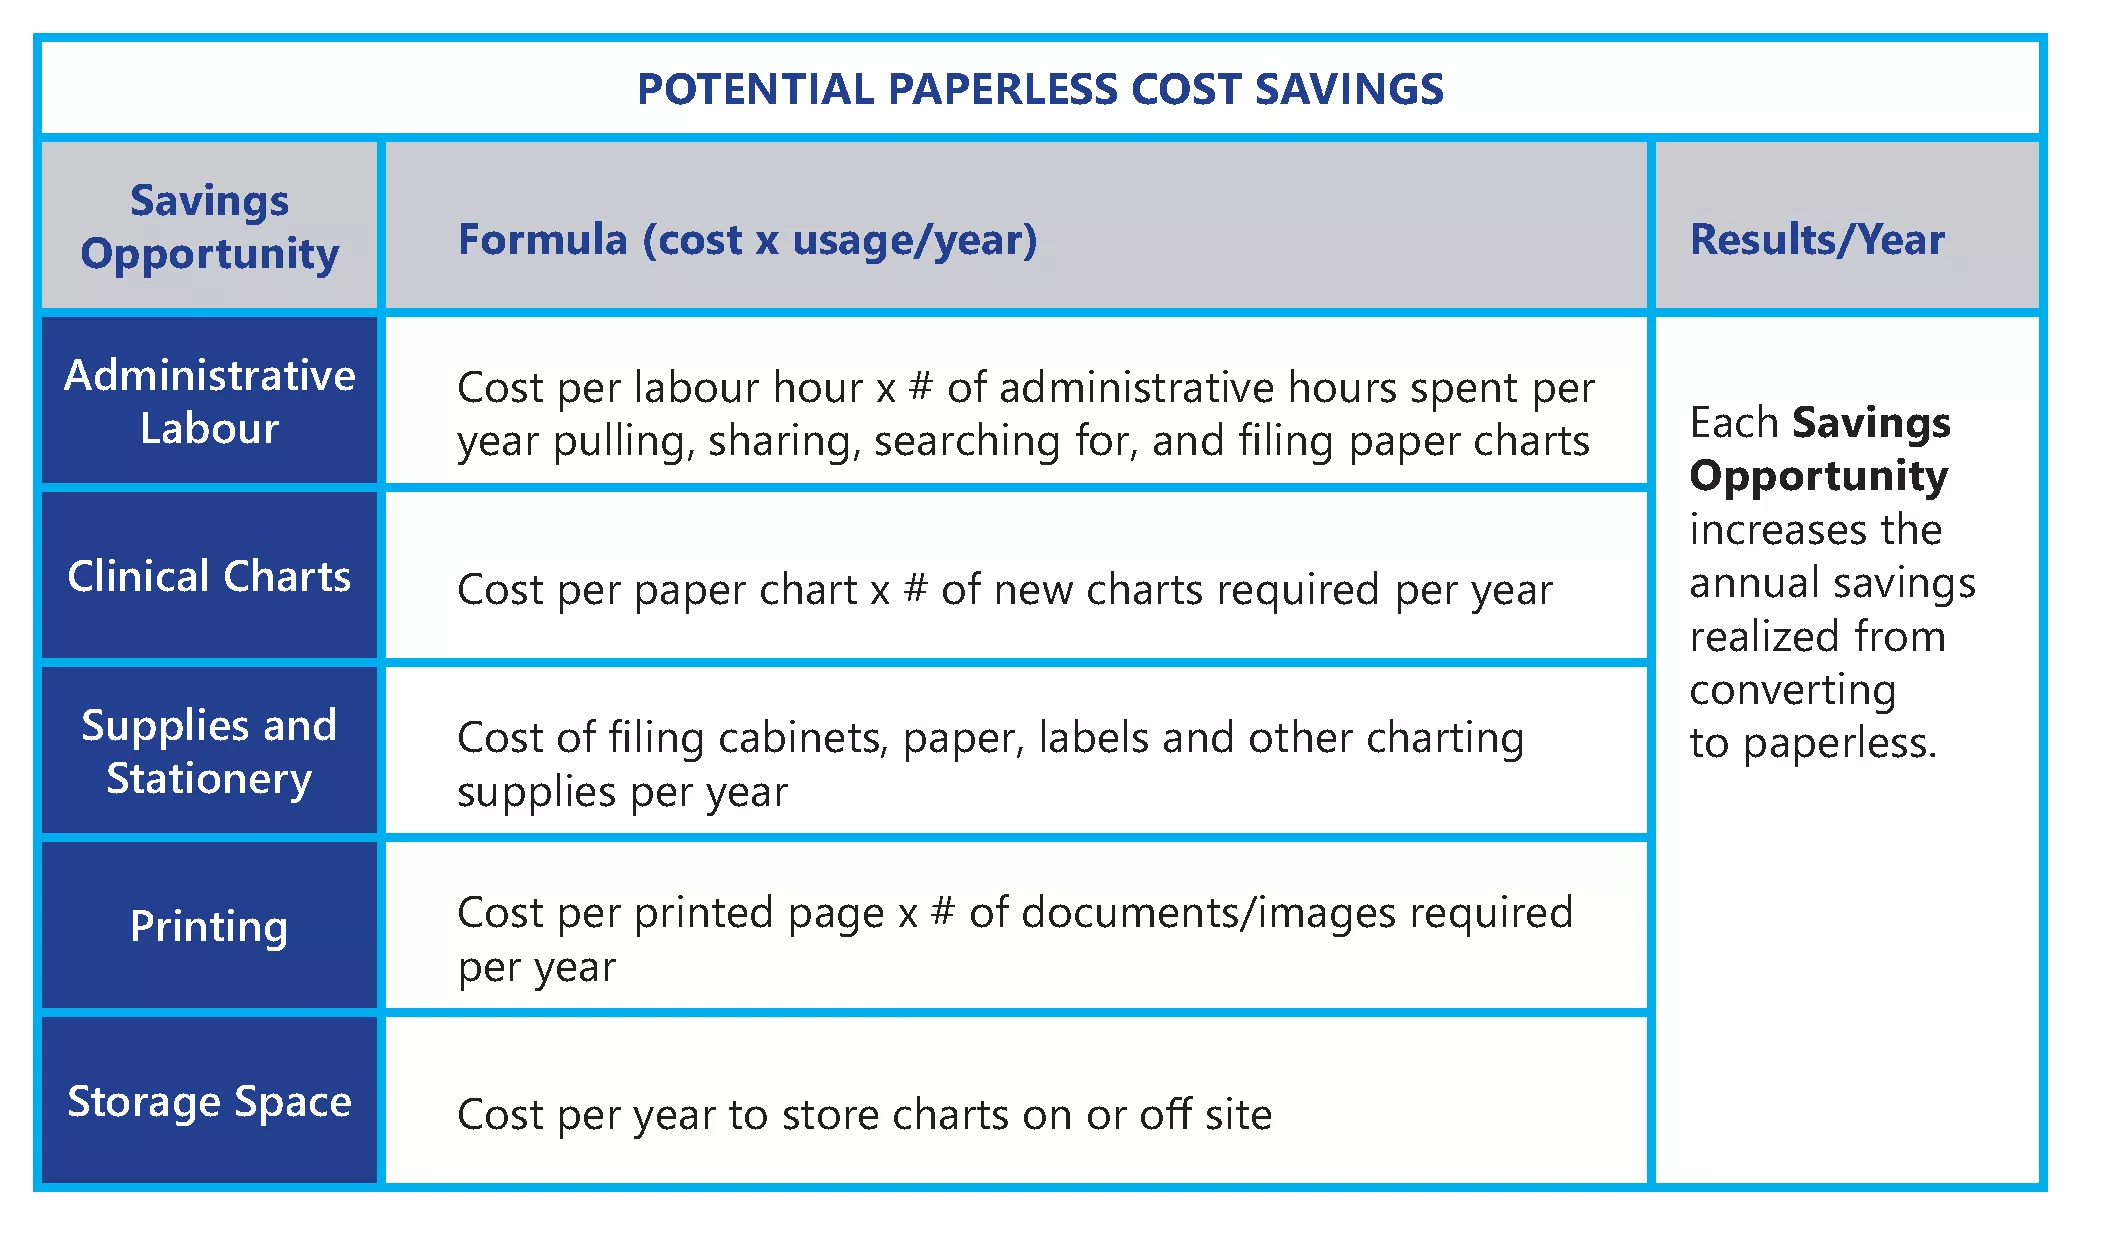 Potential paperless cost savings